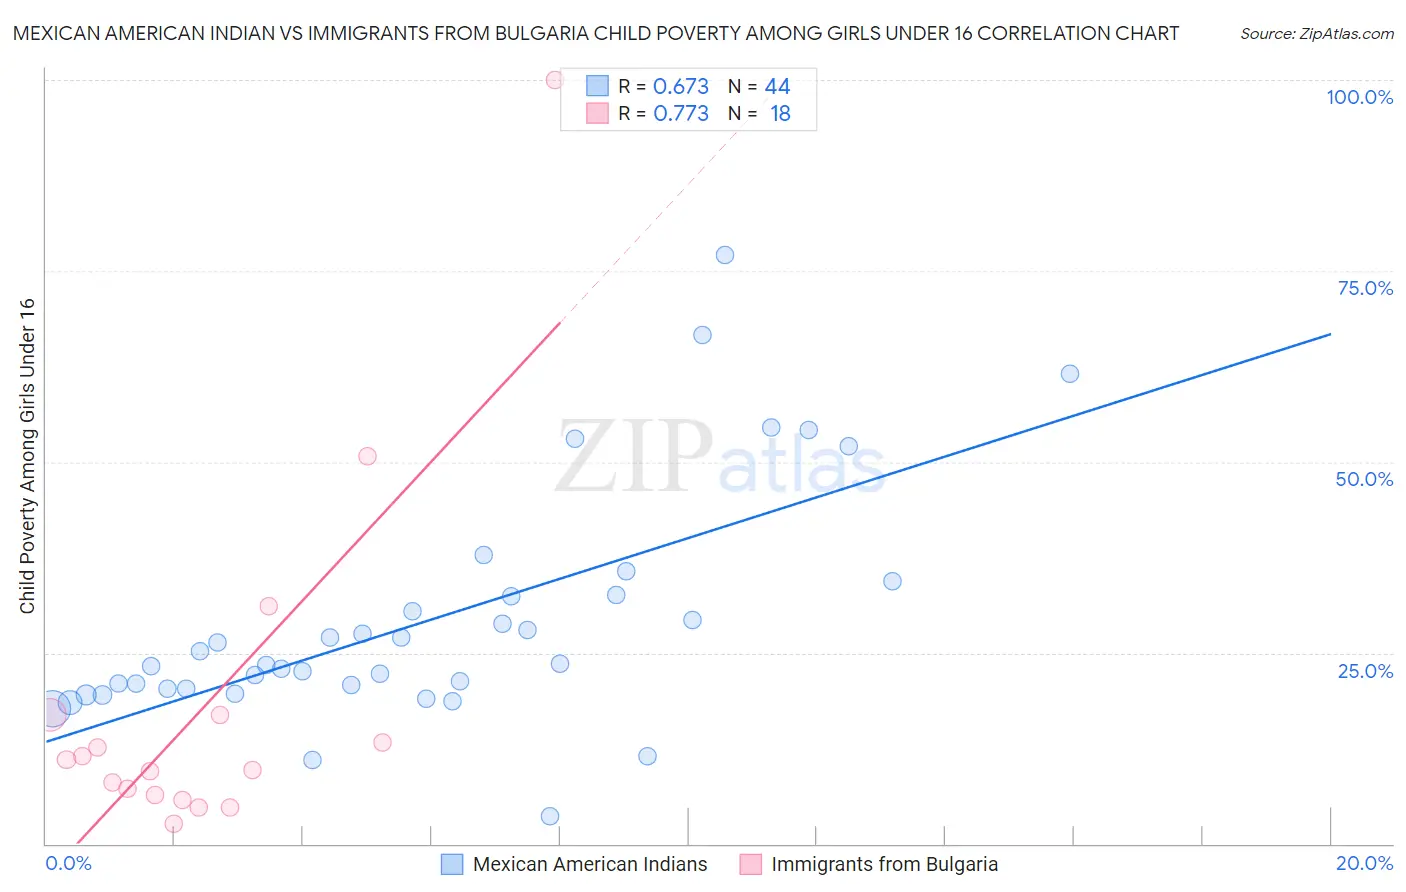 Mexican American Indian vs Immigrants from Bulgaria Child Poverty Among Girls Under 16